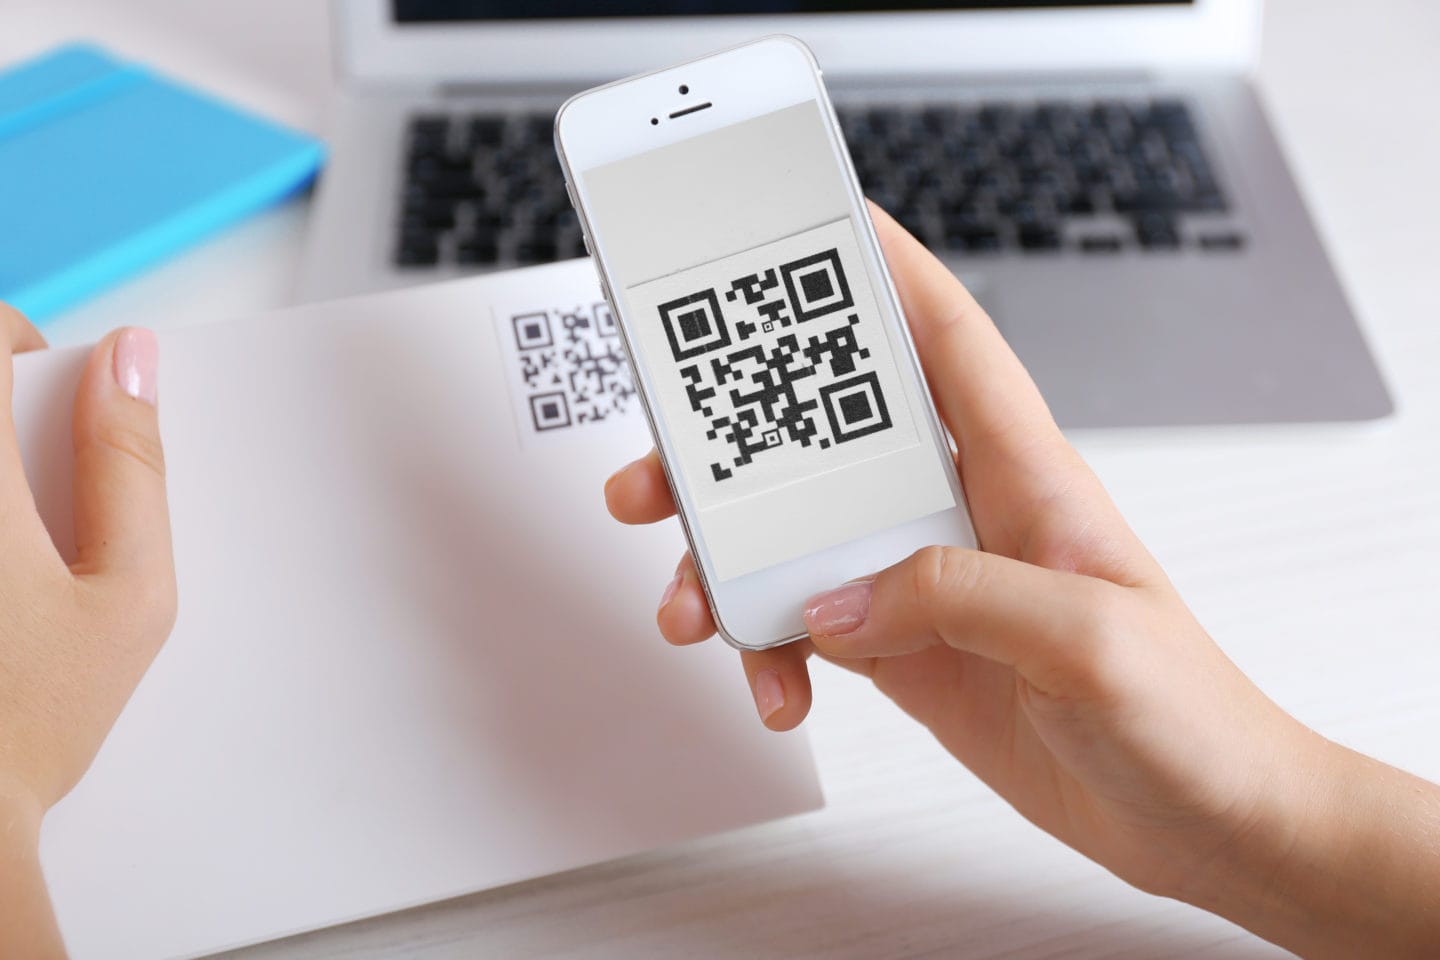 Hands holding a cell phone and scanning a QR code.